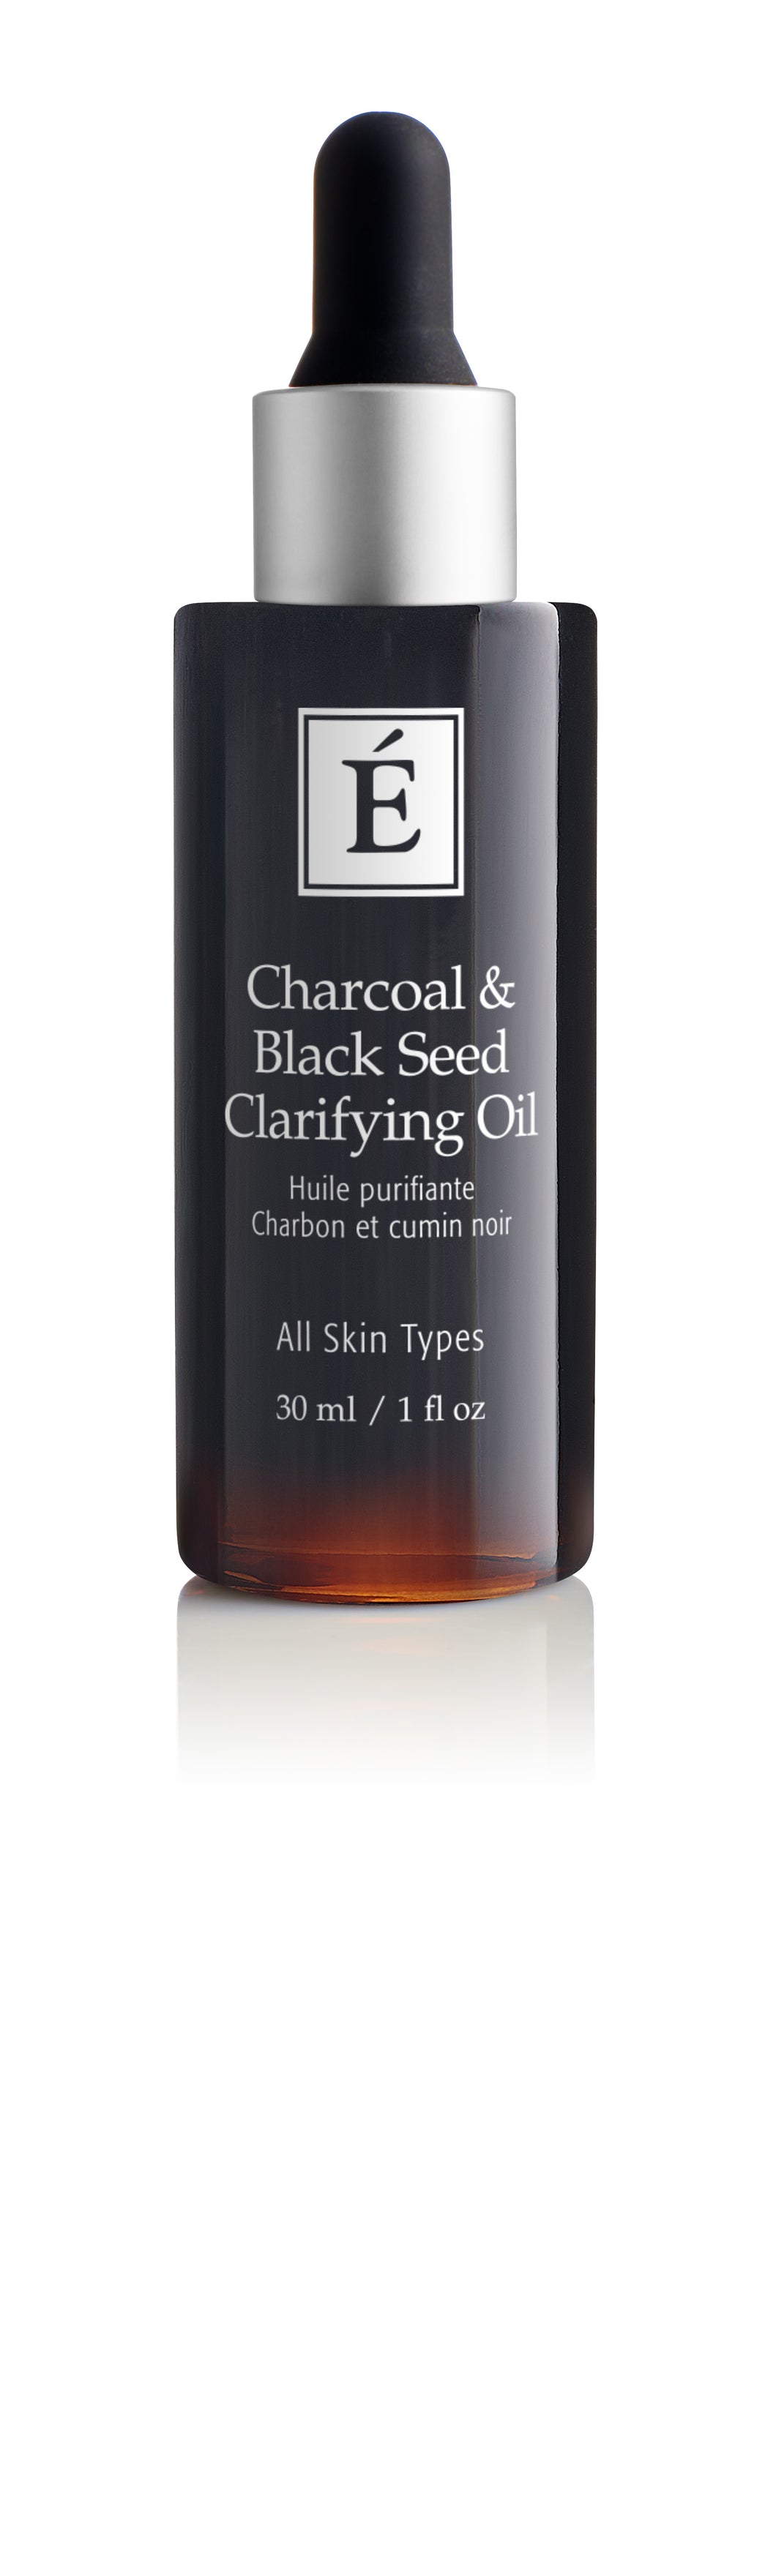 NEW Charcoal & Black Seed Clarifying Oil